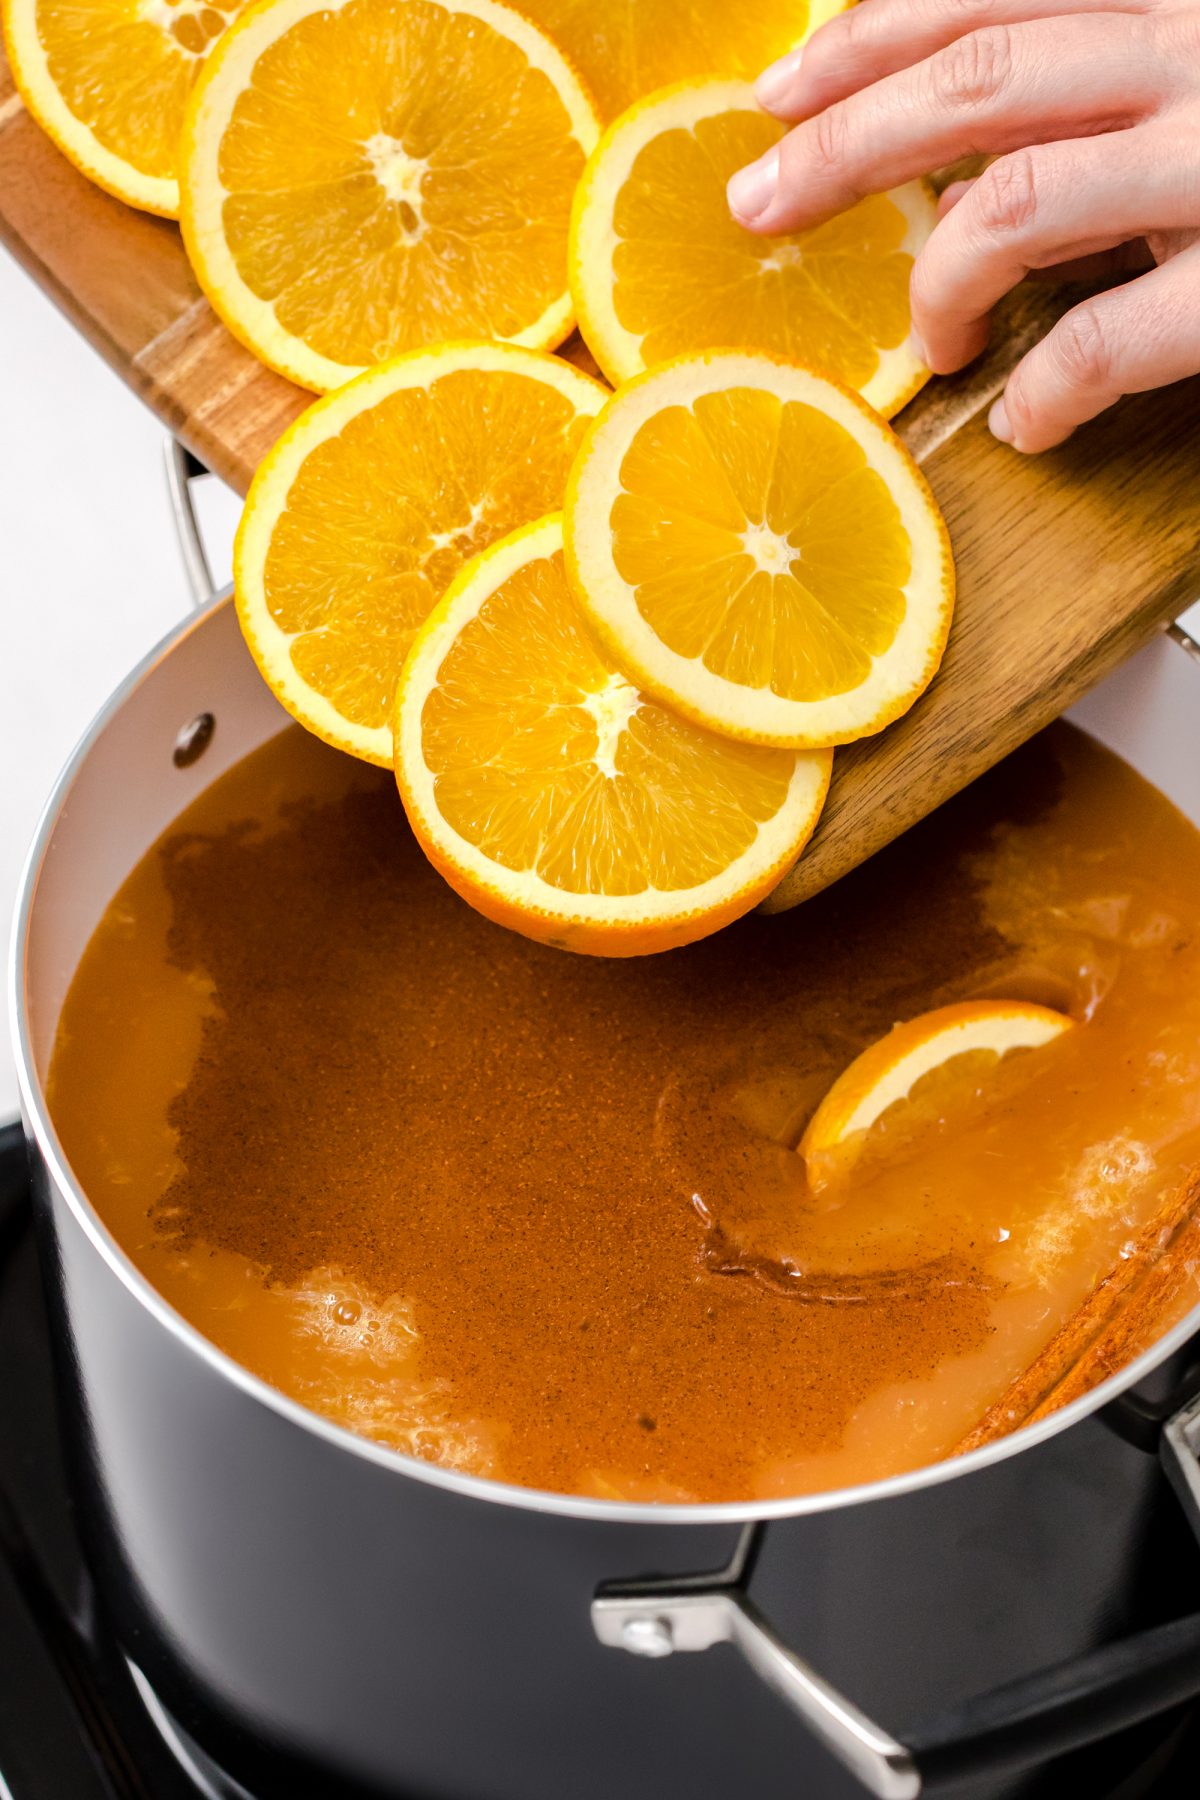 Adding oranges to the wassail holiday punch